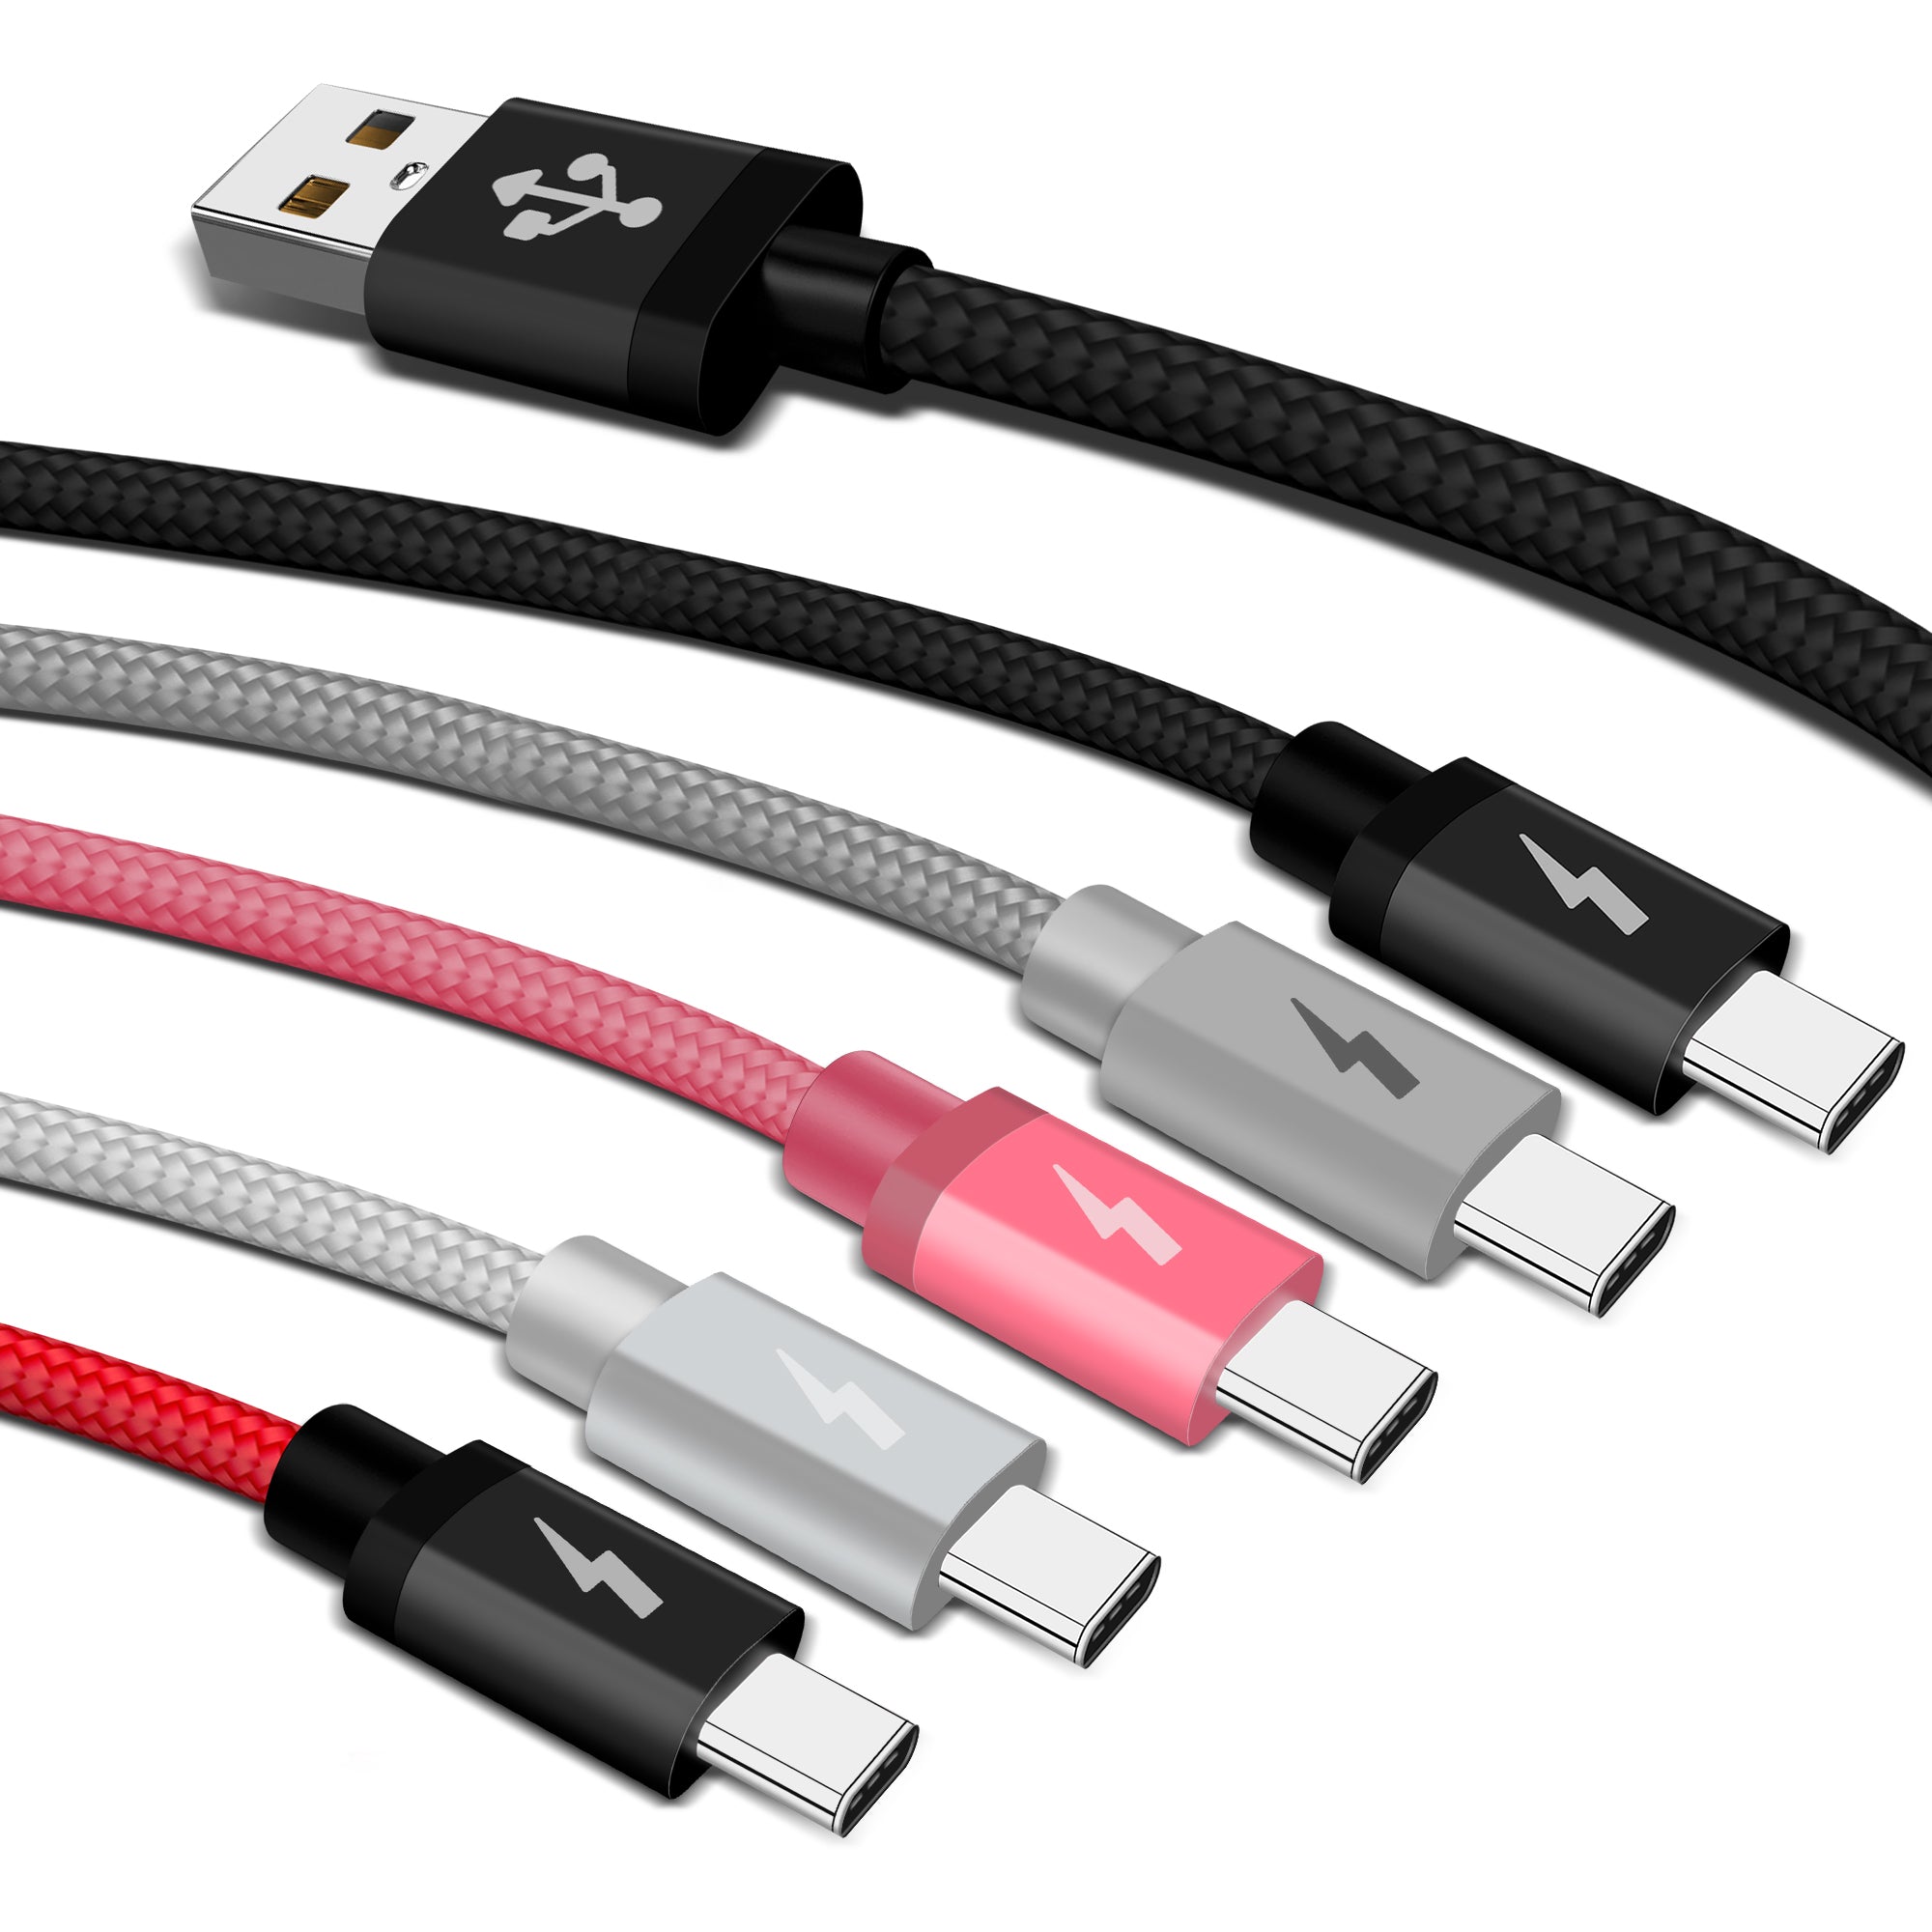 Premium Quality Braided USB Type C Cable for Charger and Data Sync